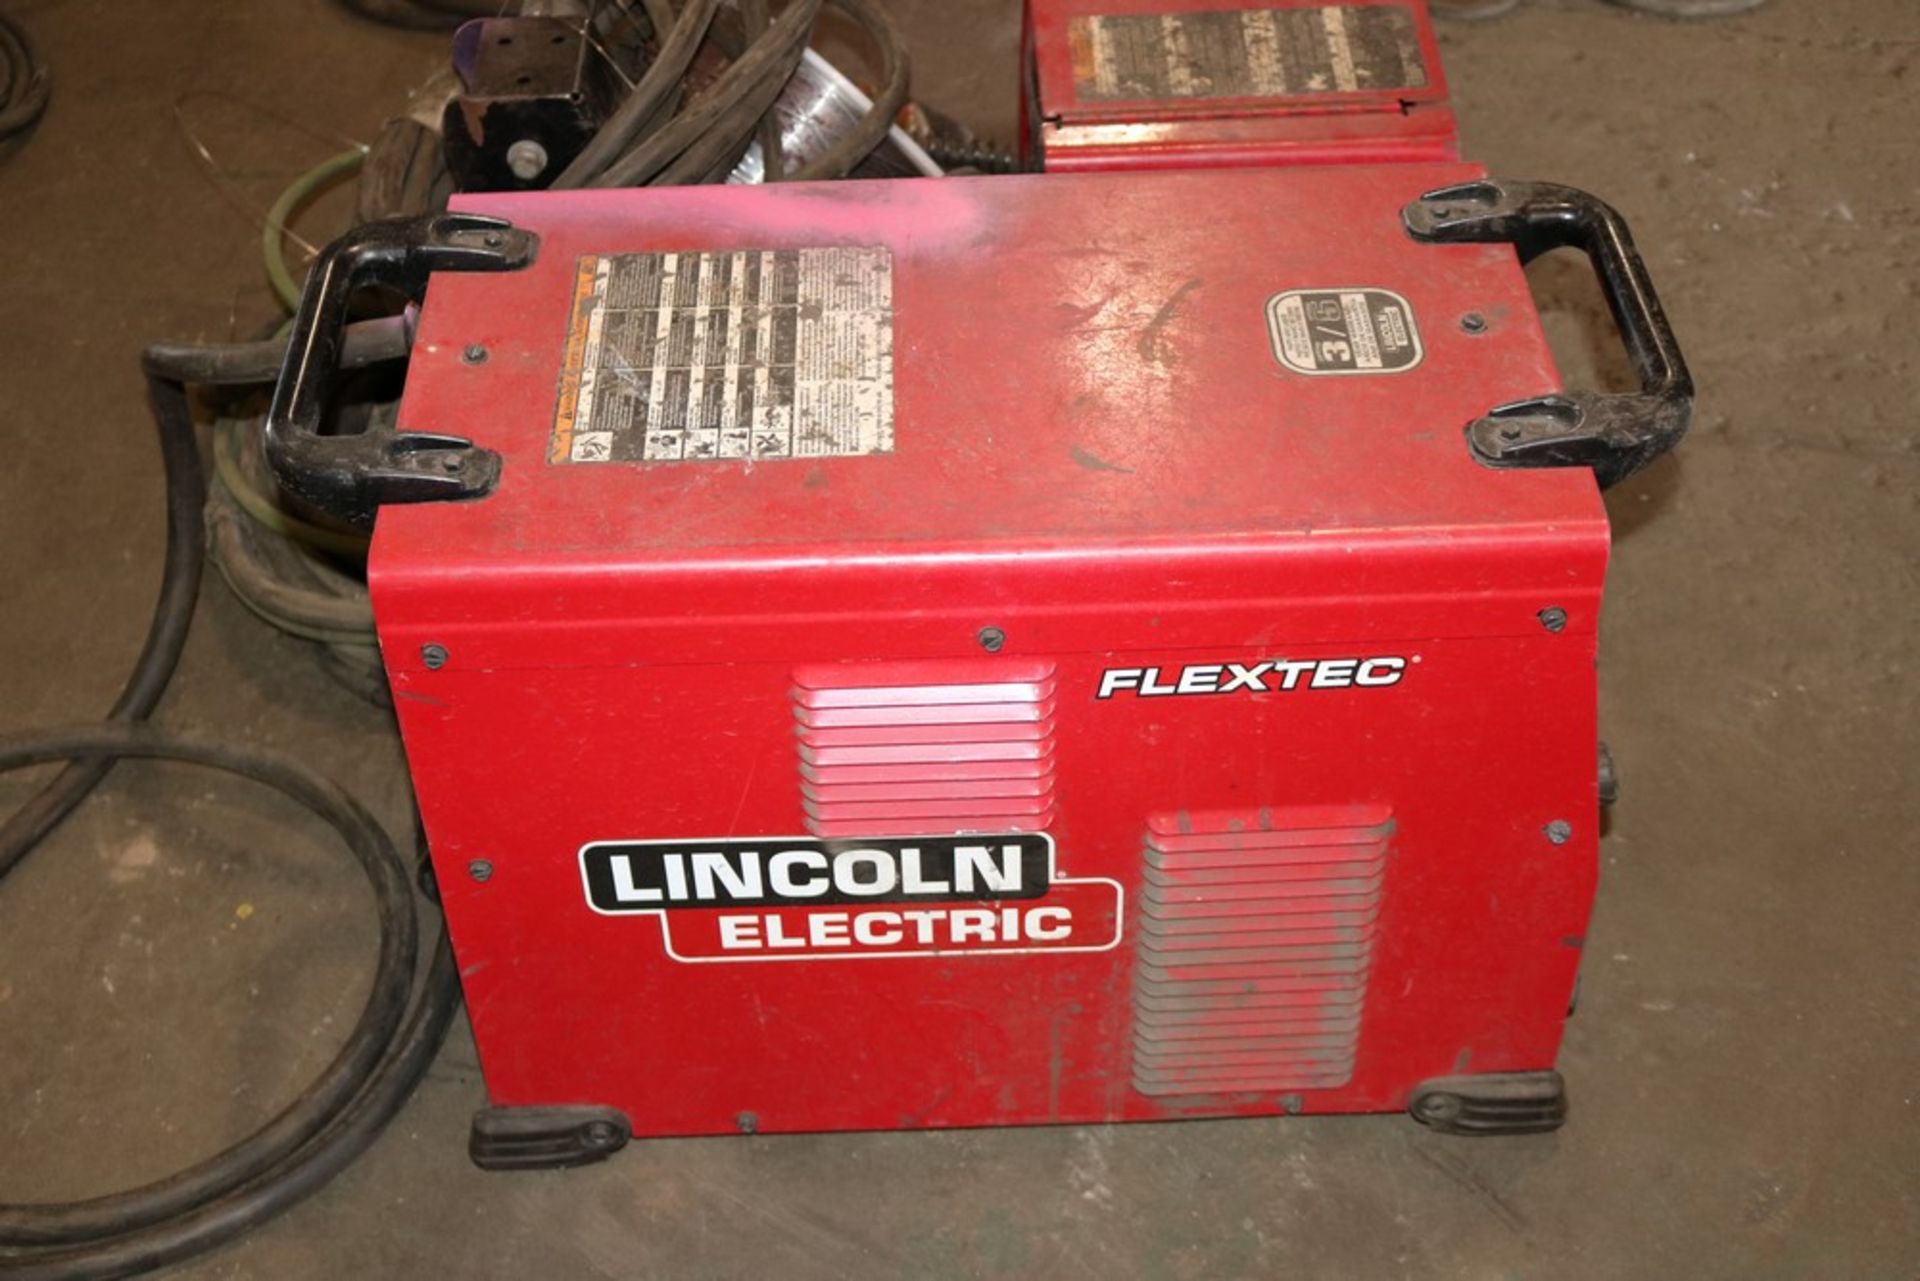 2020 Lincoln Electric Flextec 500X Welder - Image 7 of 9